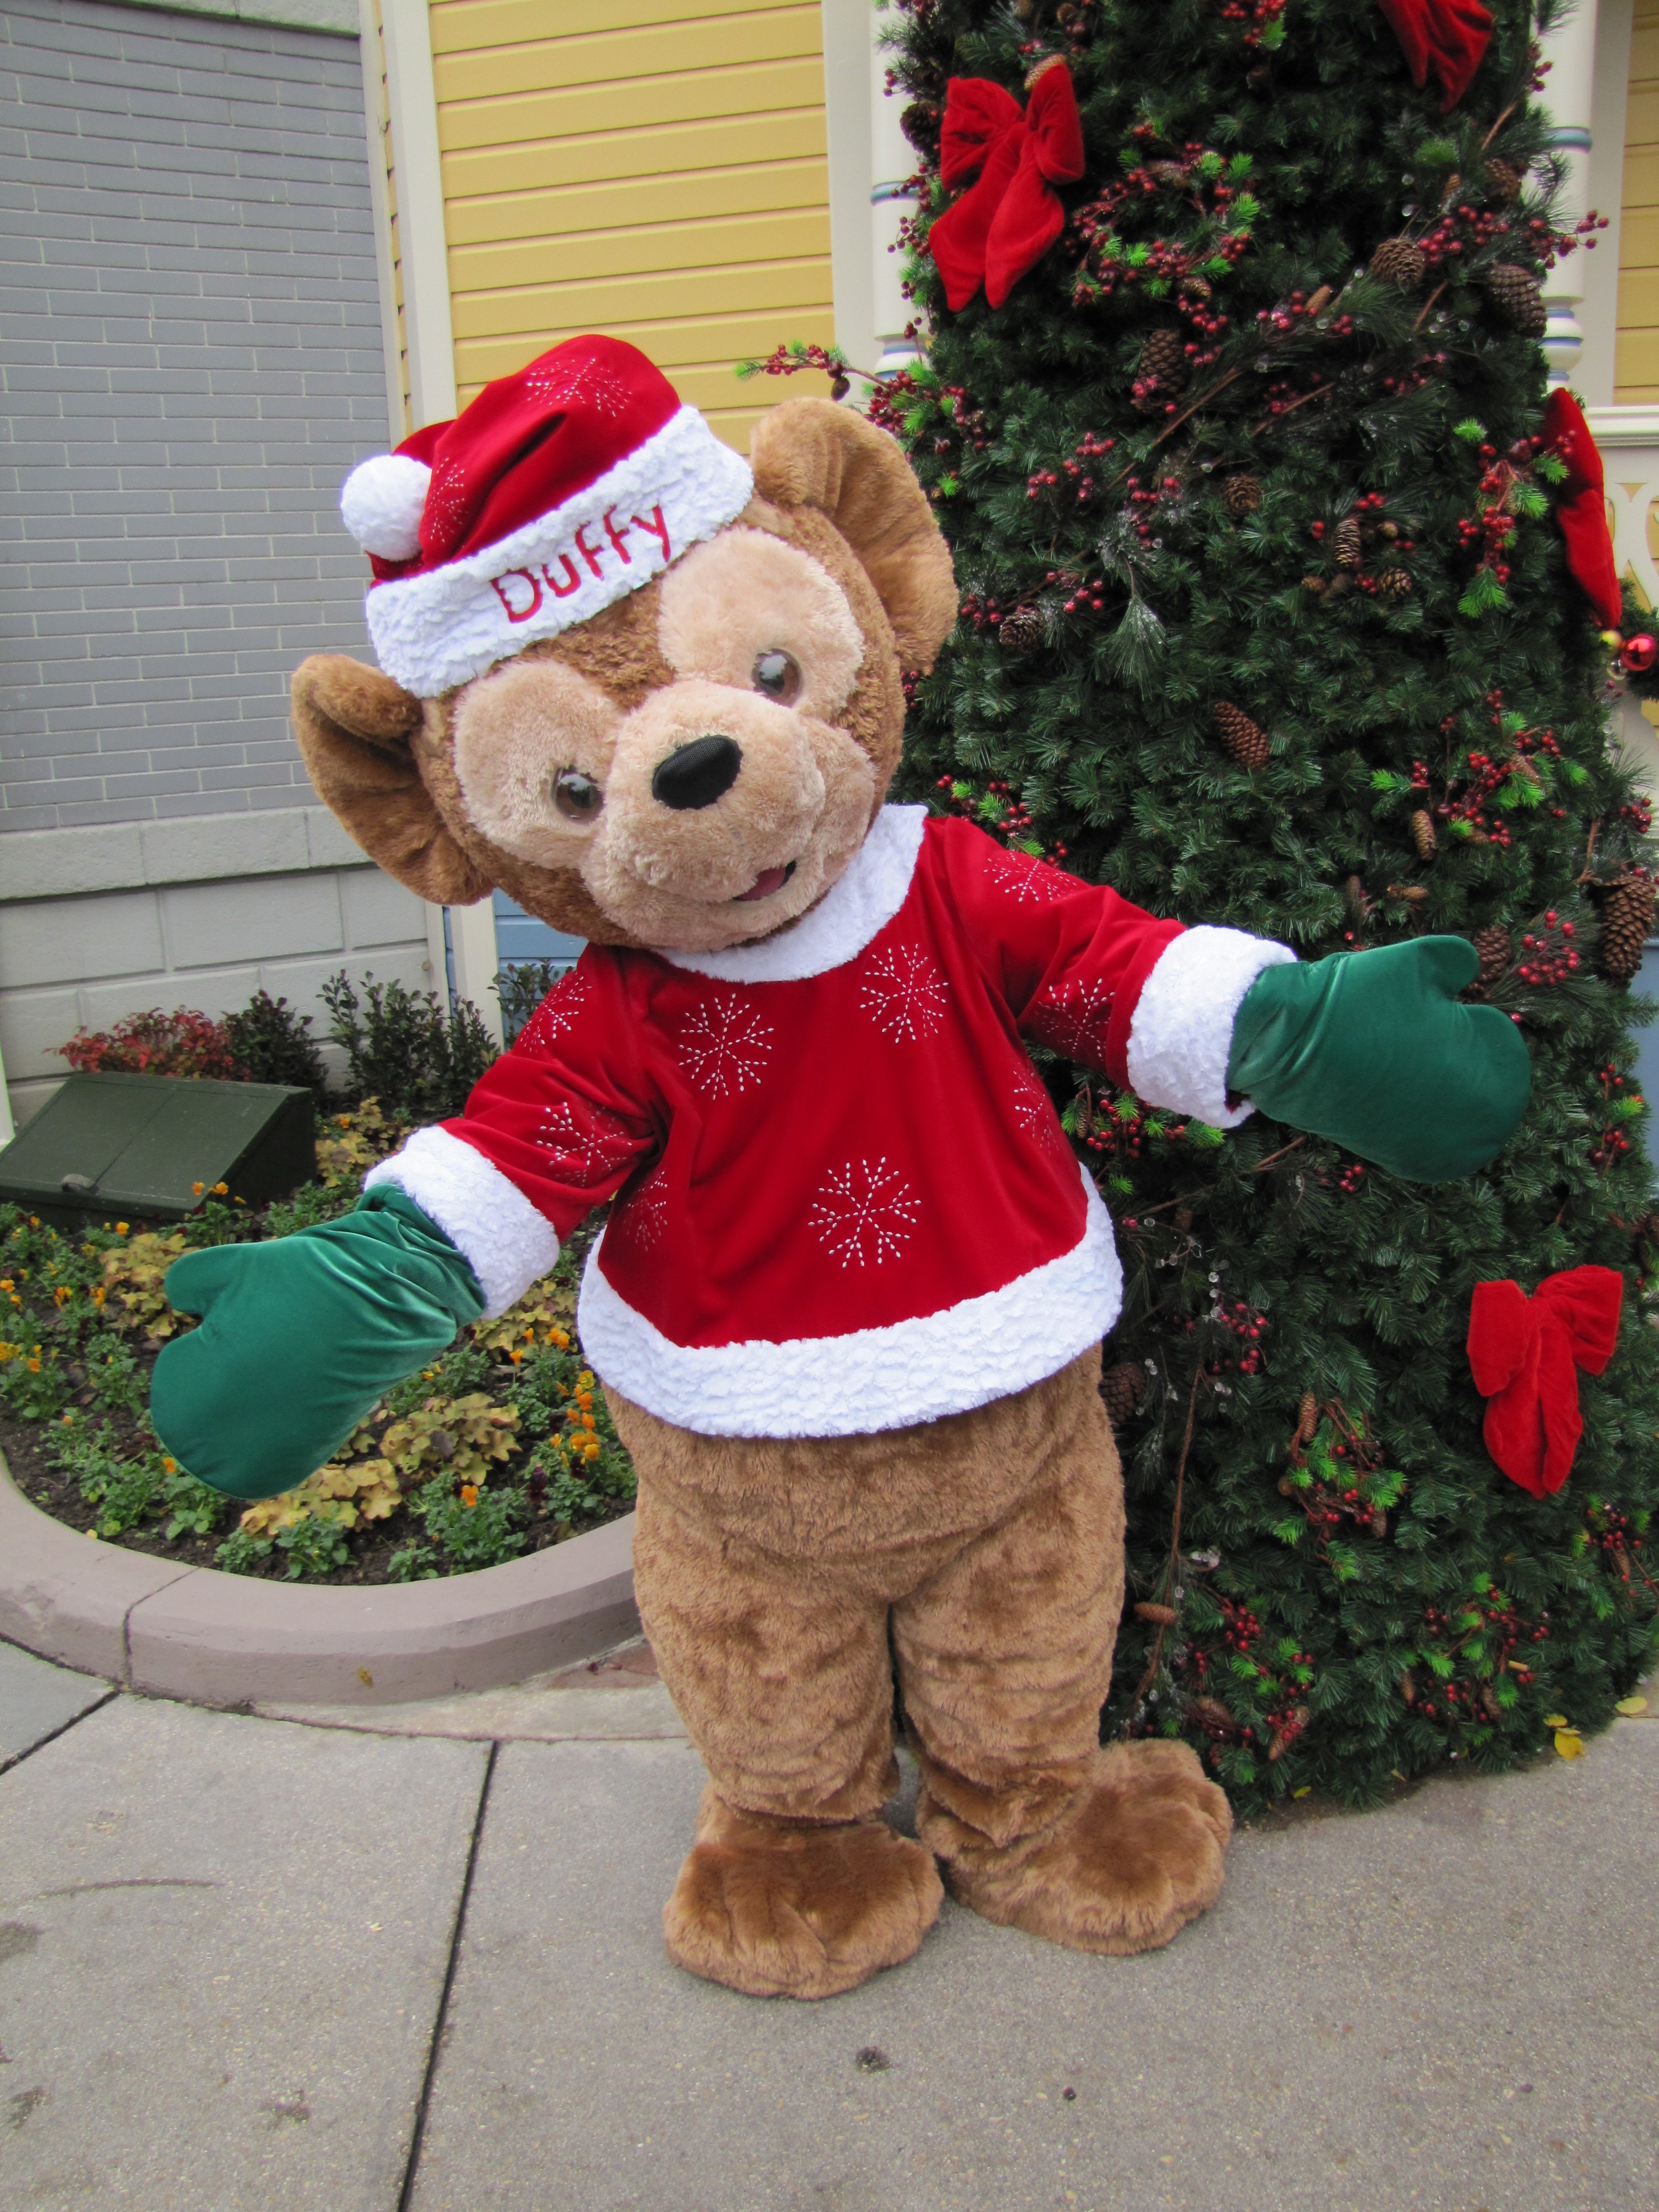 During the Christmas Season Duffy can be found on Main Street USA wearing his Christmas outfit. This was the version in 2011.